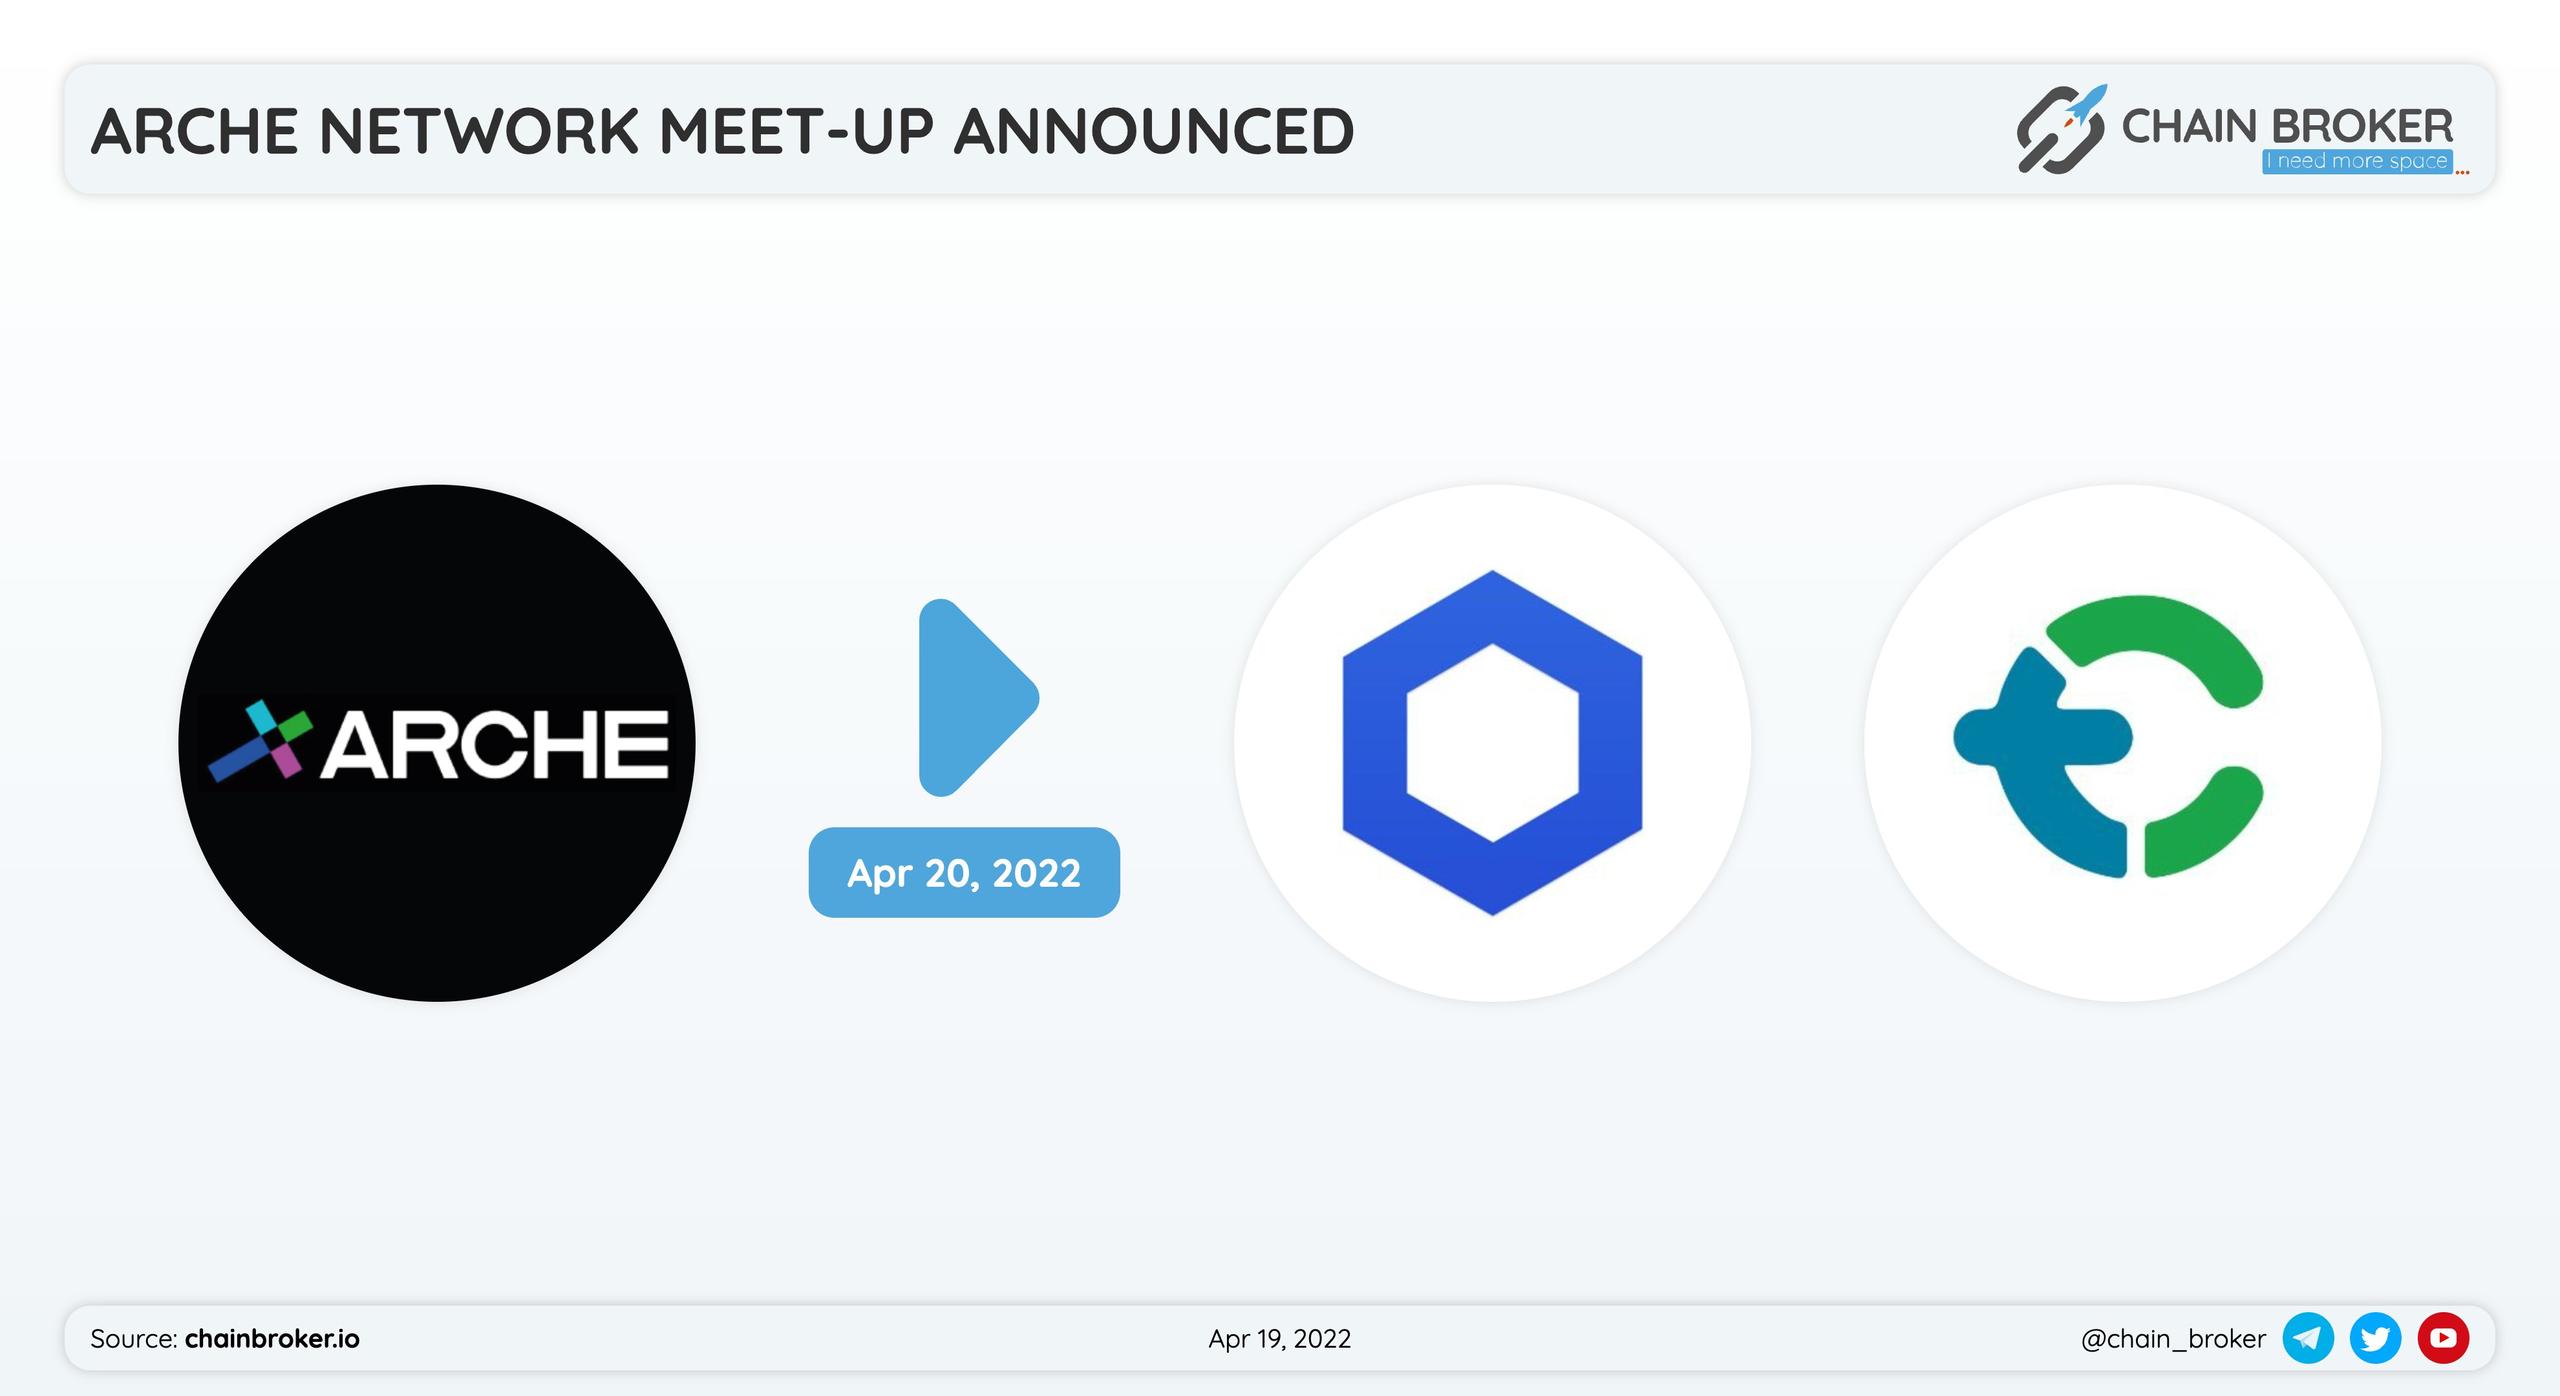 Arche Network has partnered with Chainlink and Tokocrypto for a meet-up.